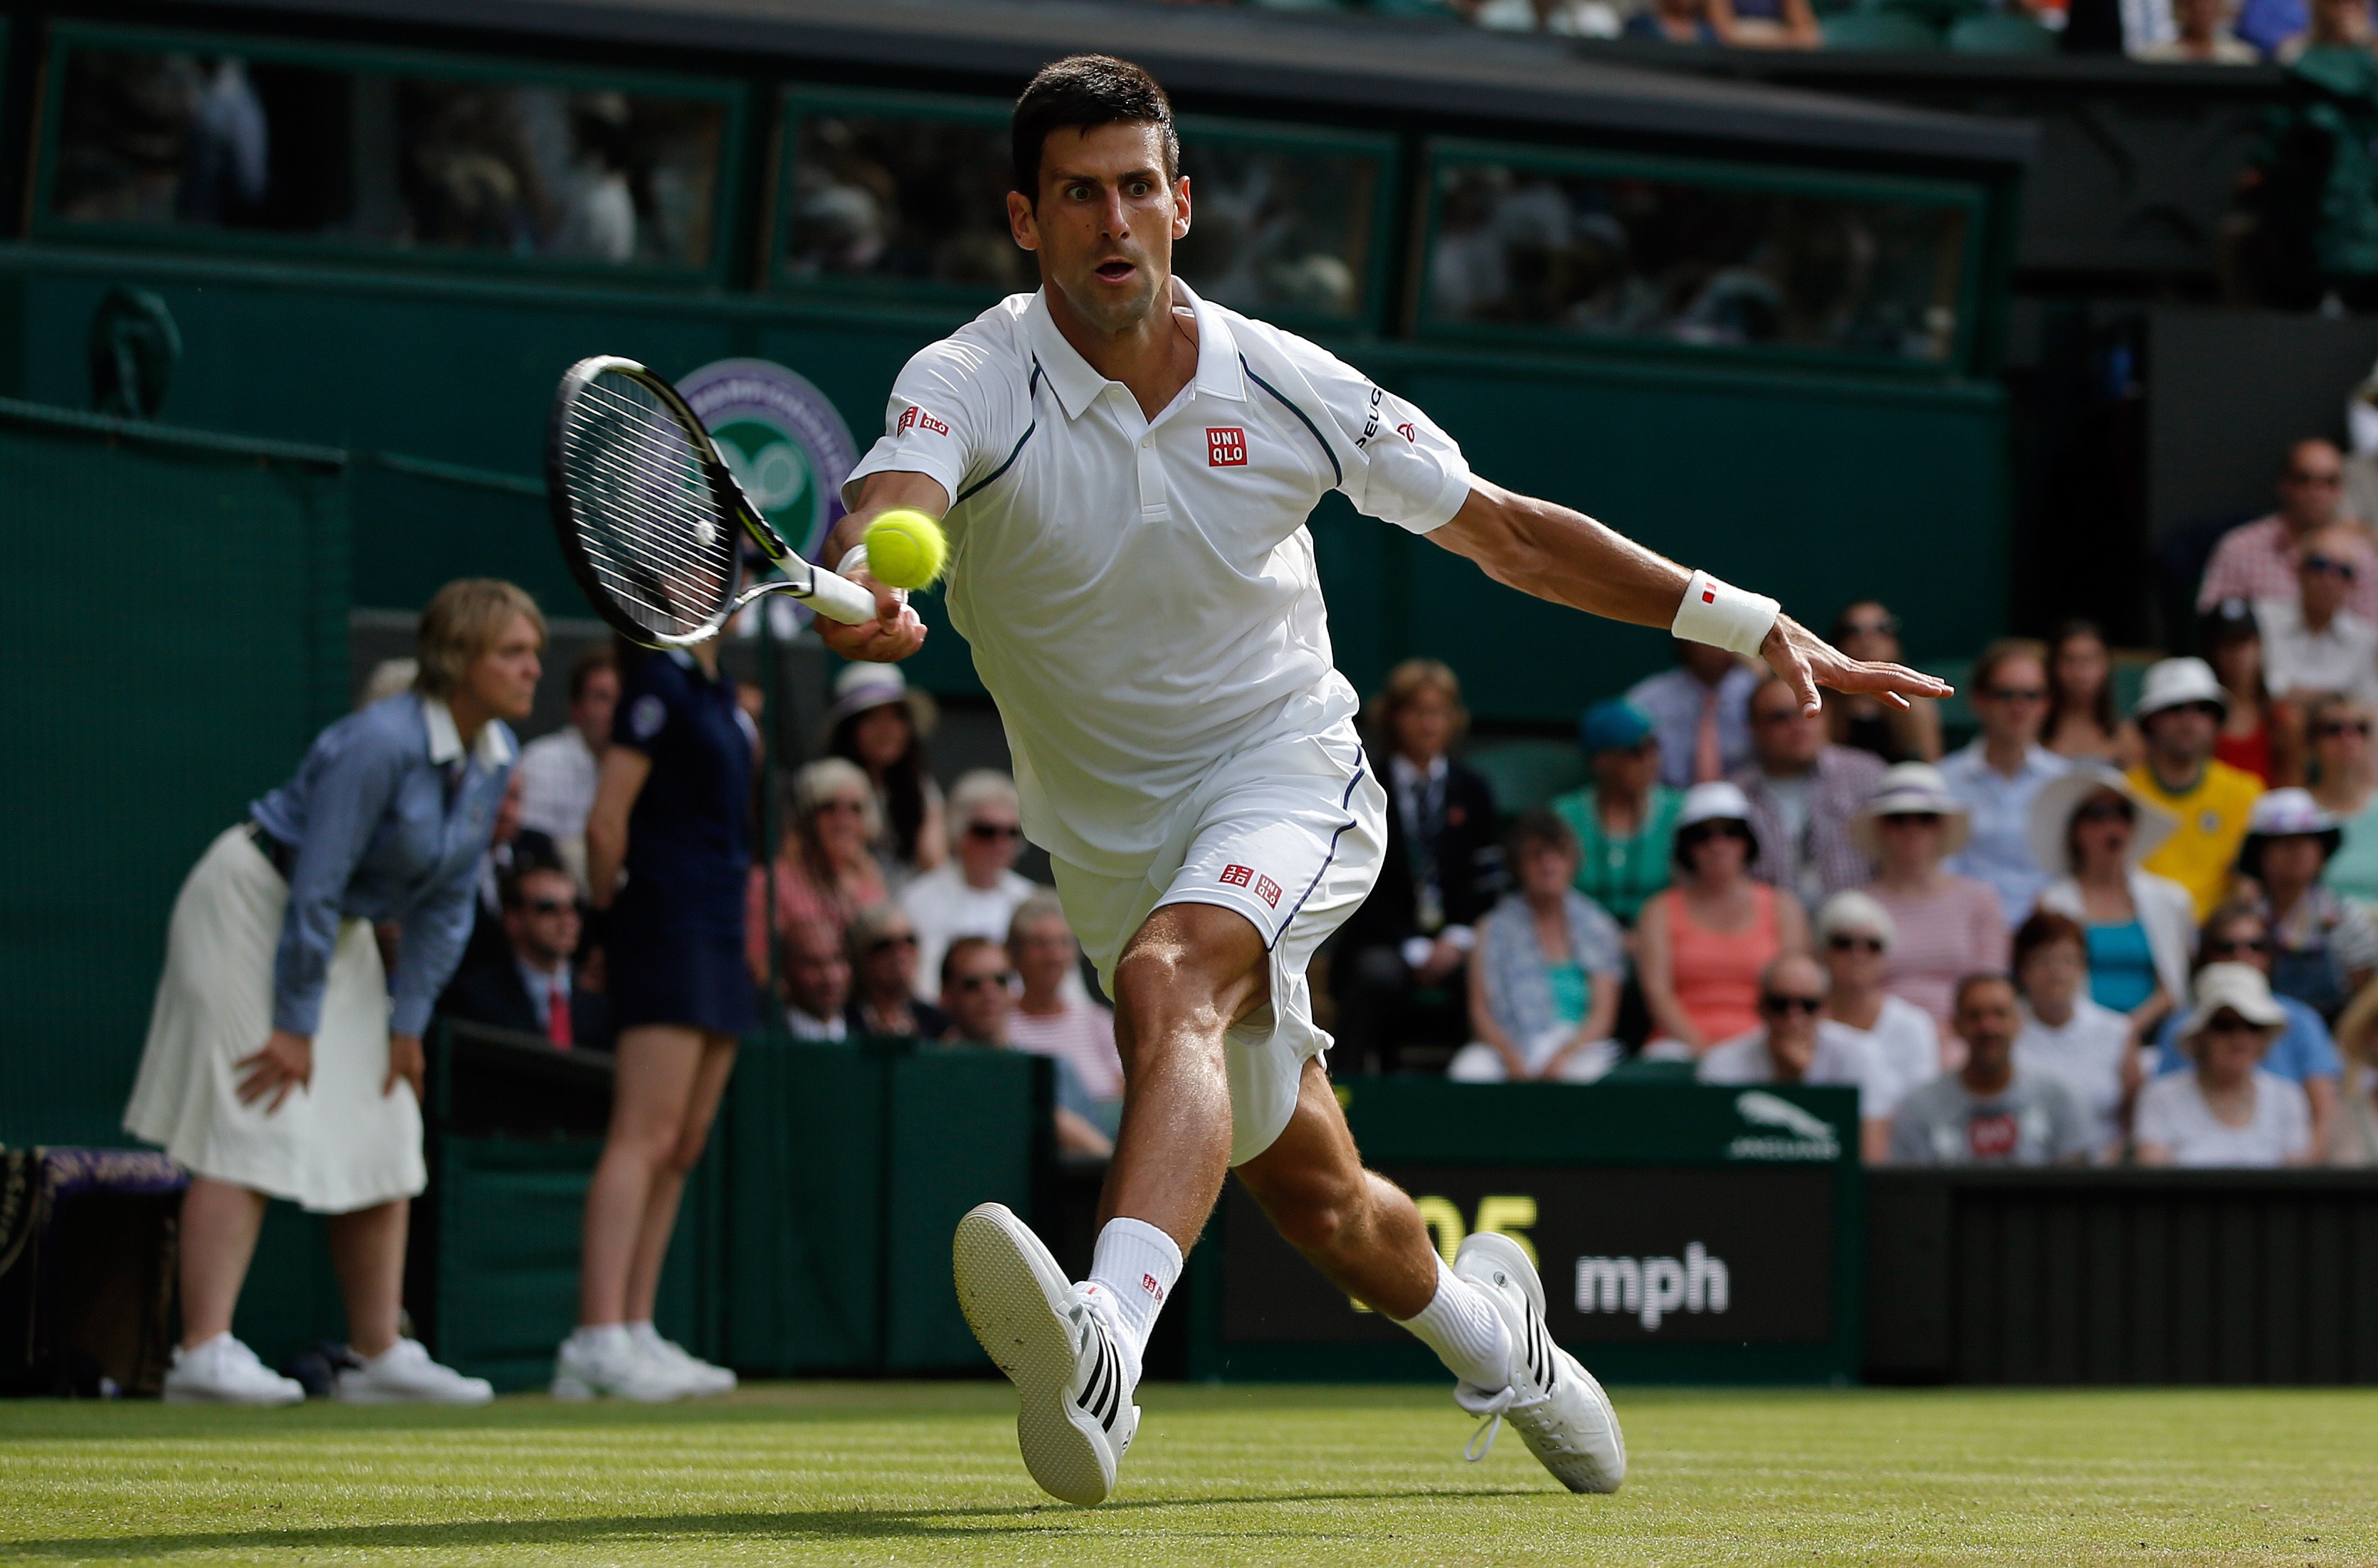 Novak Djokovic Endorsements 5 Fast Facts You Need to Know